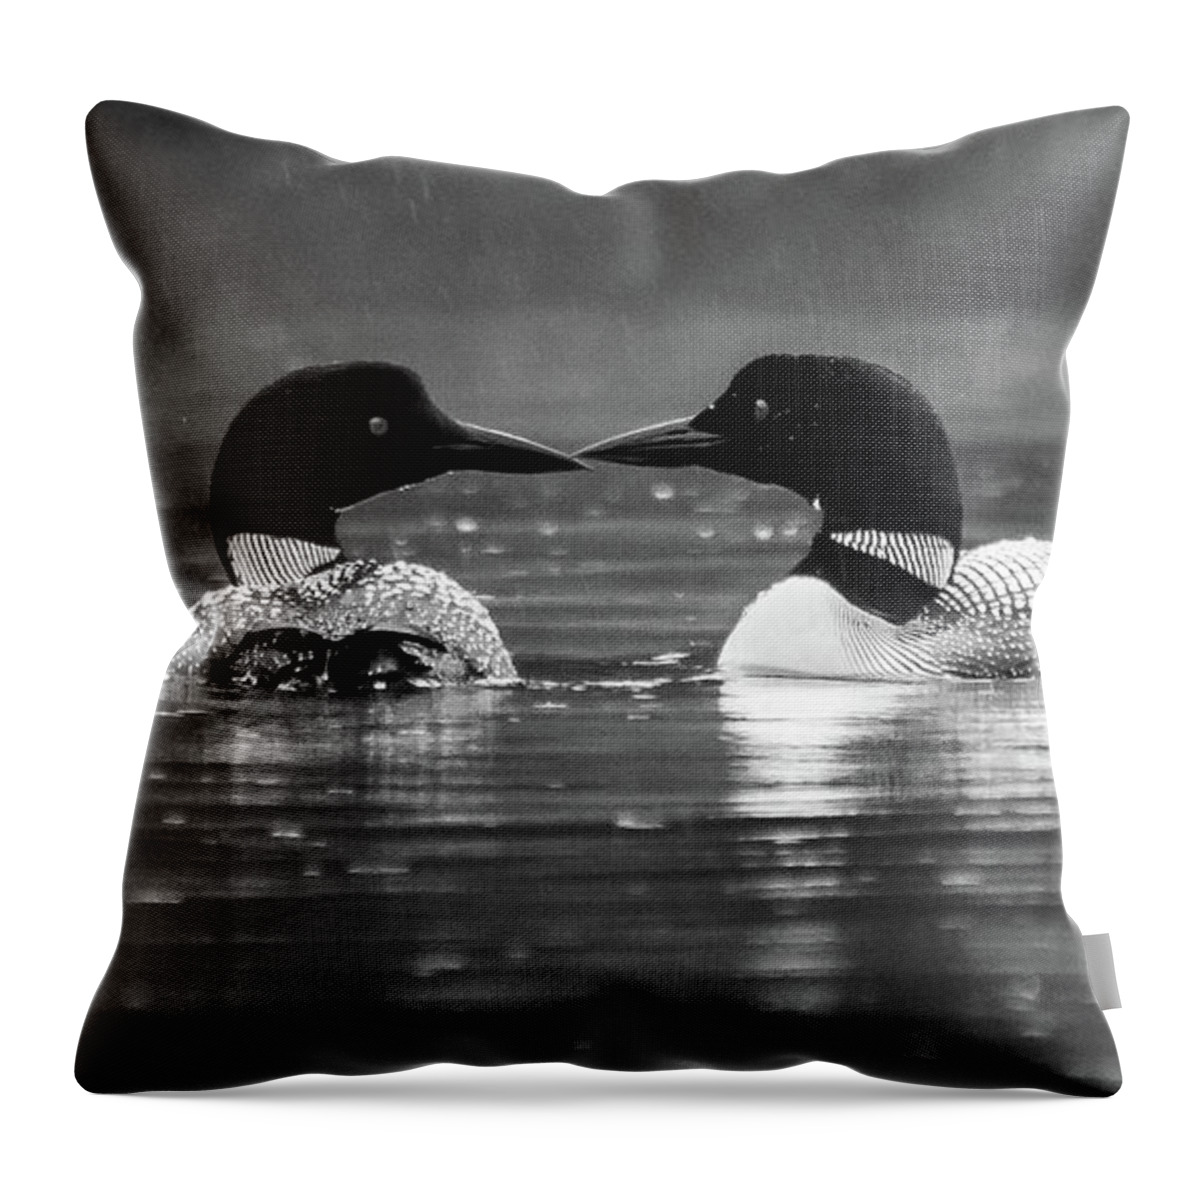 Black And White Throw Pillow featuring the photograph Loving Loons by Darryl Hendricks